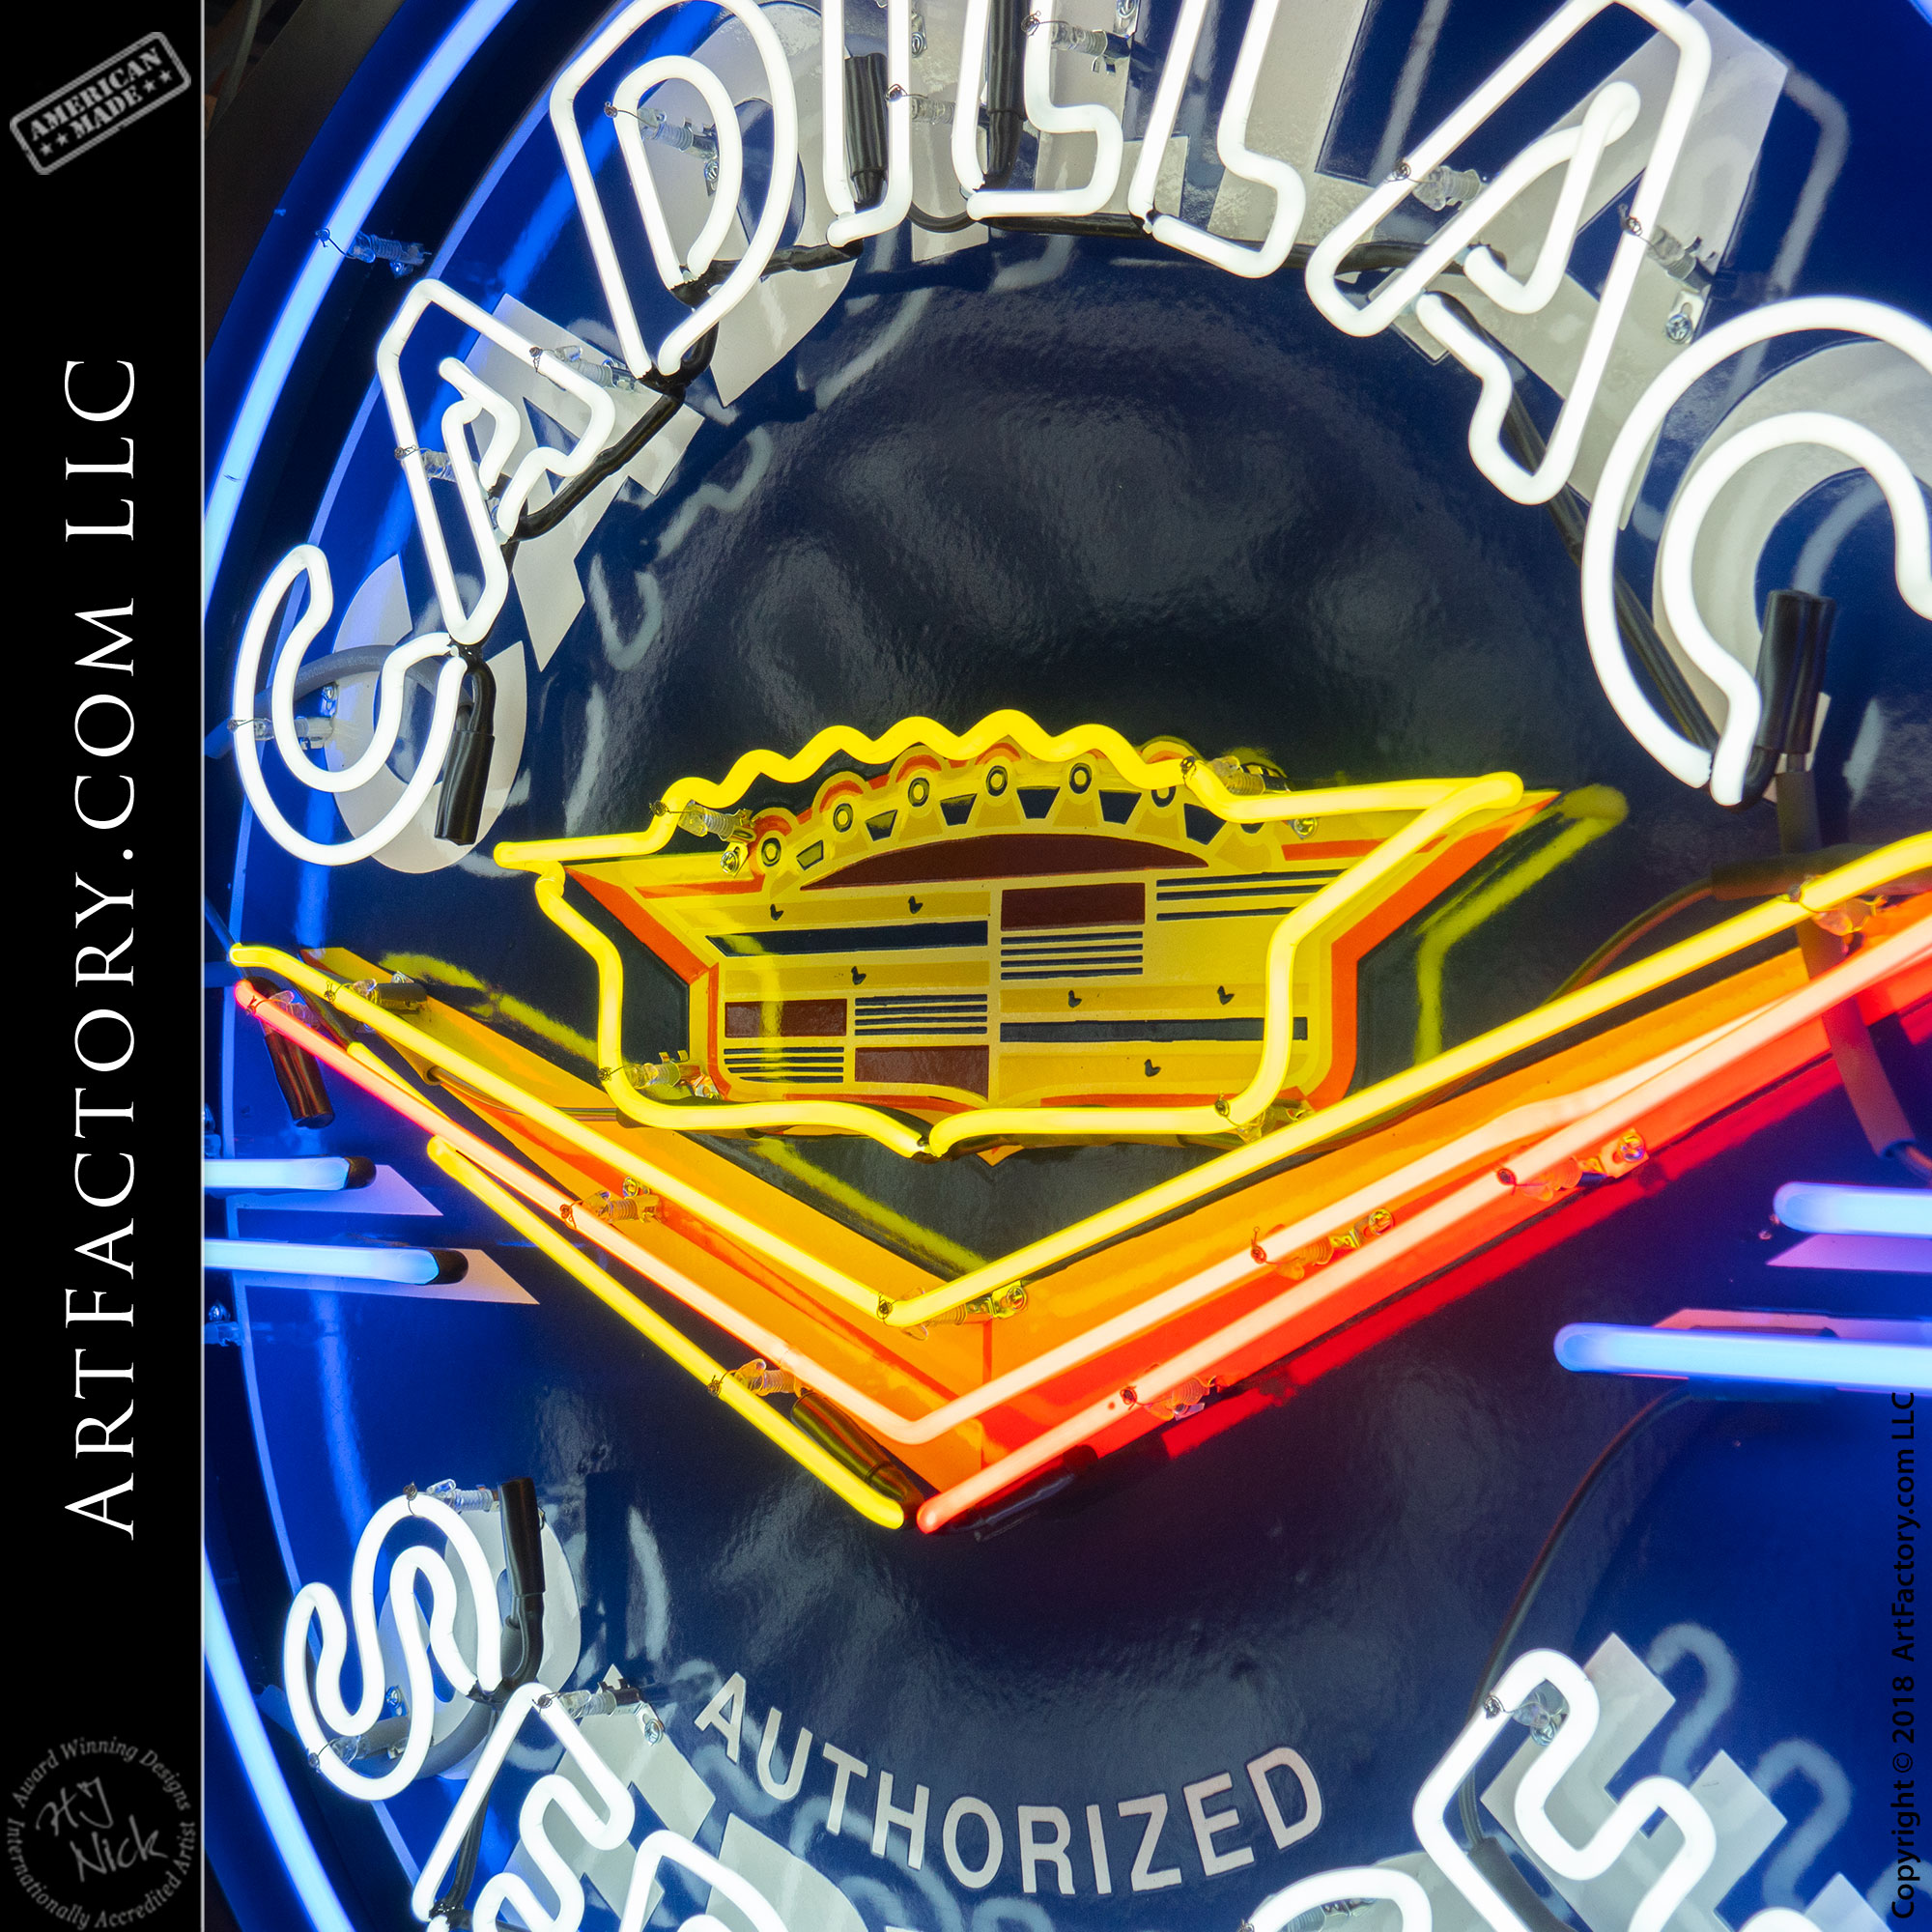 CADILLAC AUTHORIZED SERVICE ROUND METAL SIGN 